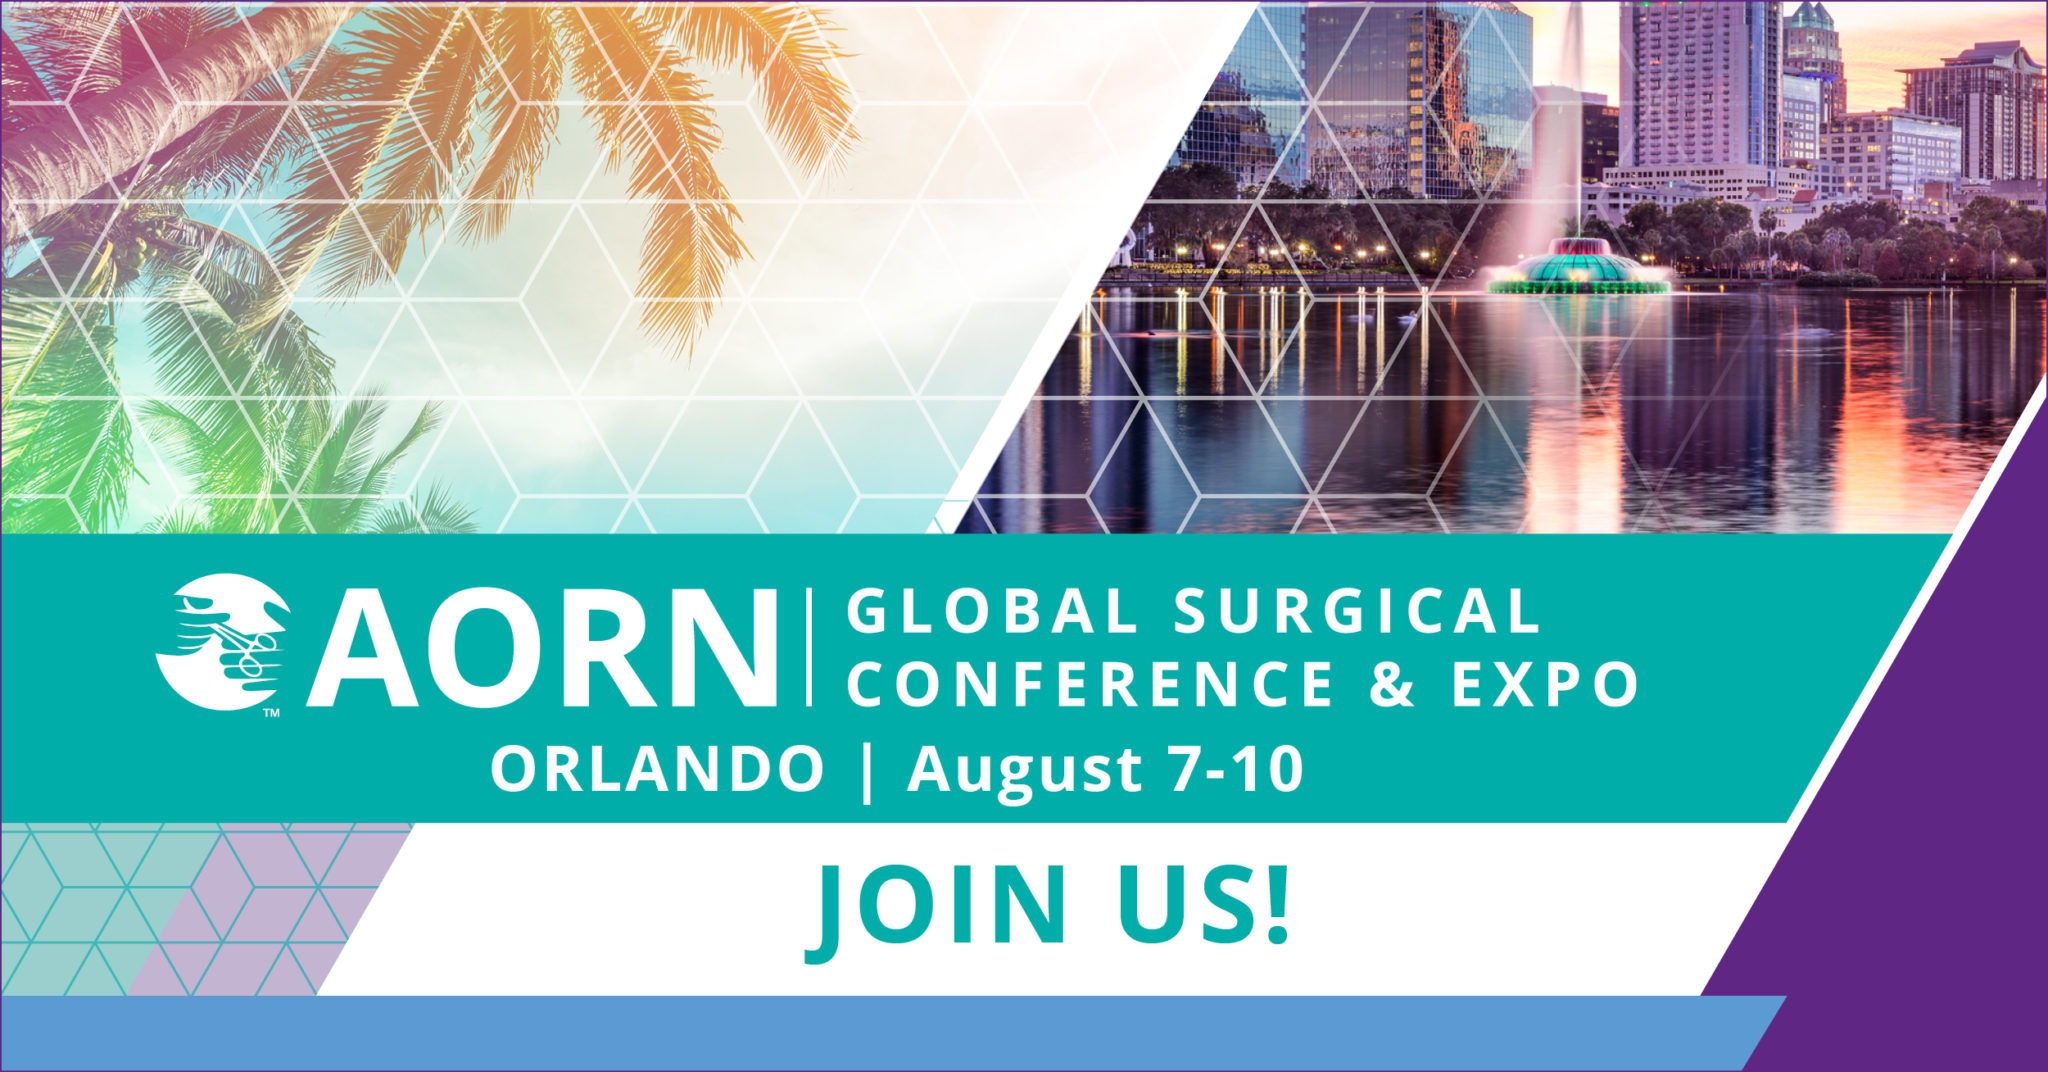 AORN Global Surgical Conference & Expo 2021 DinamicOR